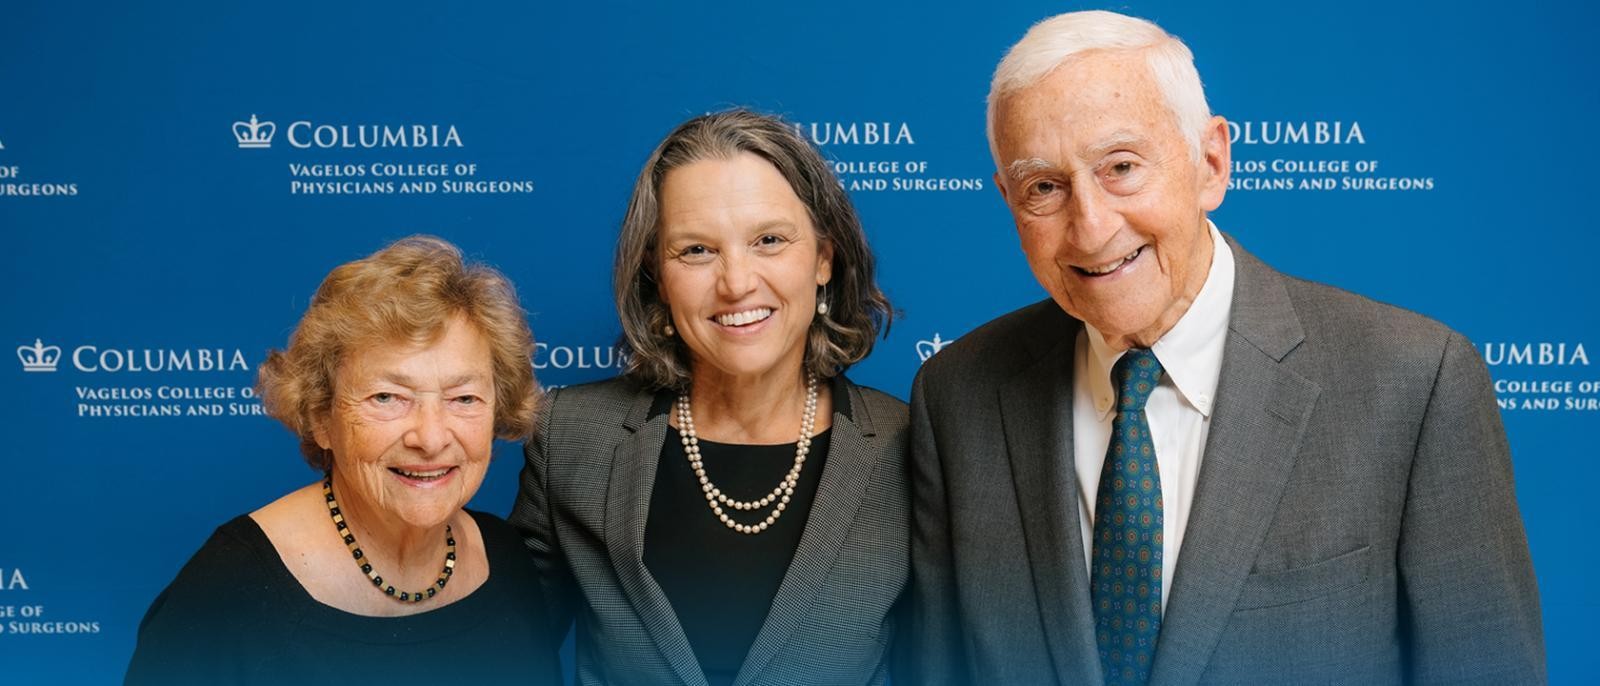 Roy and Diana Vagelos Institute for Biomedical Research Education Launched at Columbia University with $175 Million Gift